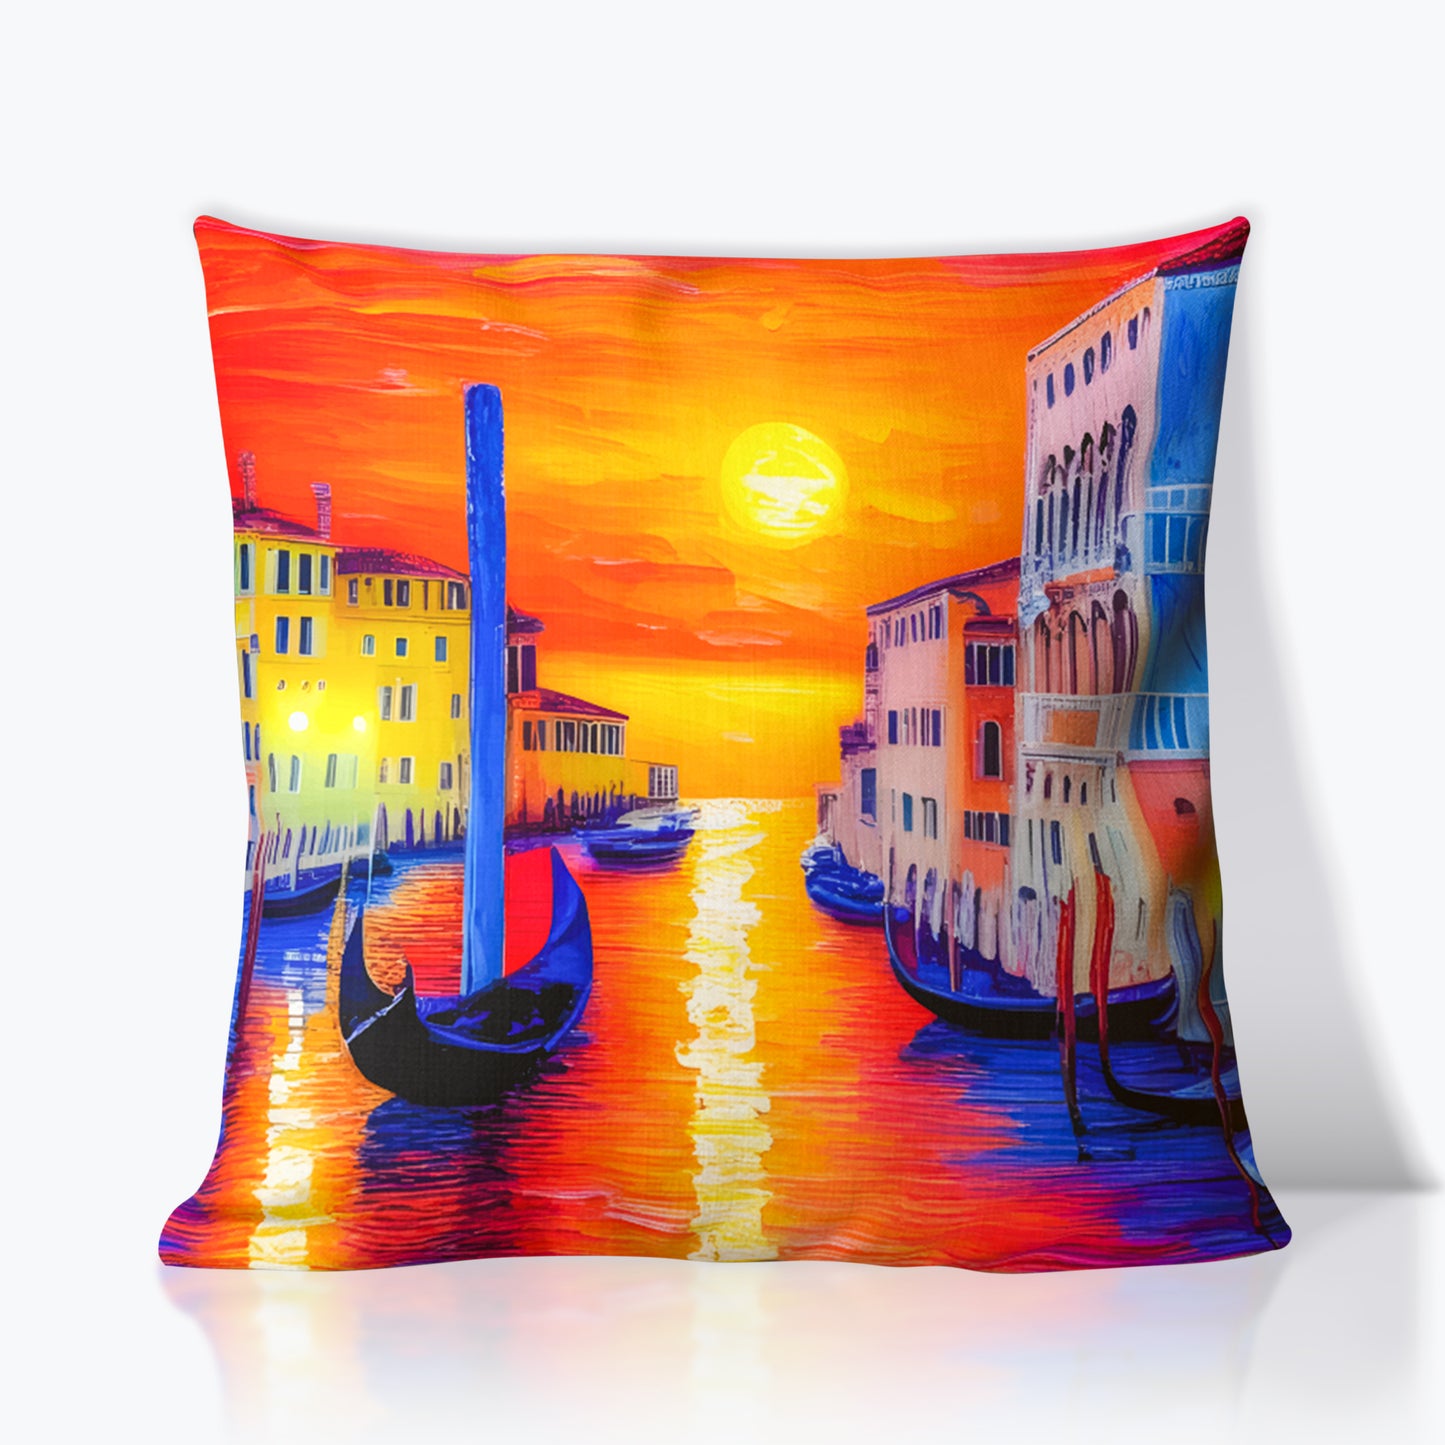 Premium Pillow - Venice | Luxurious and comfortable accent for your home decor | Seepu